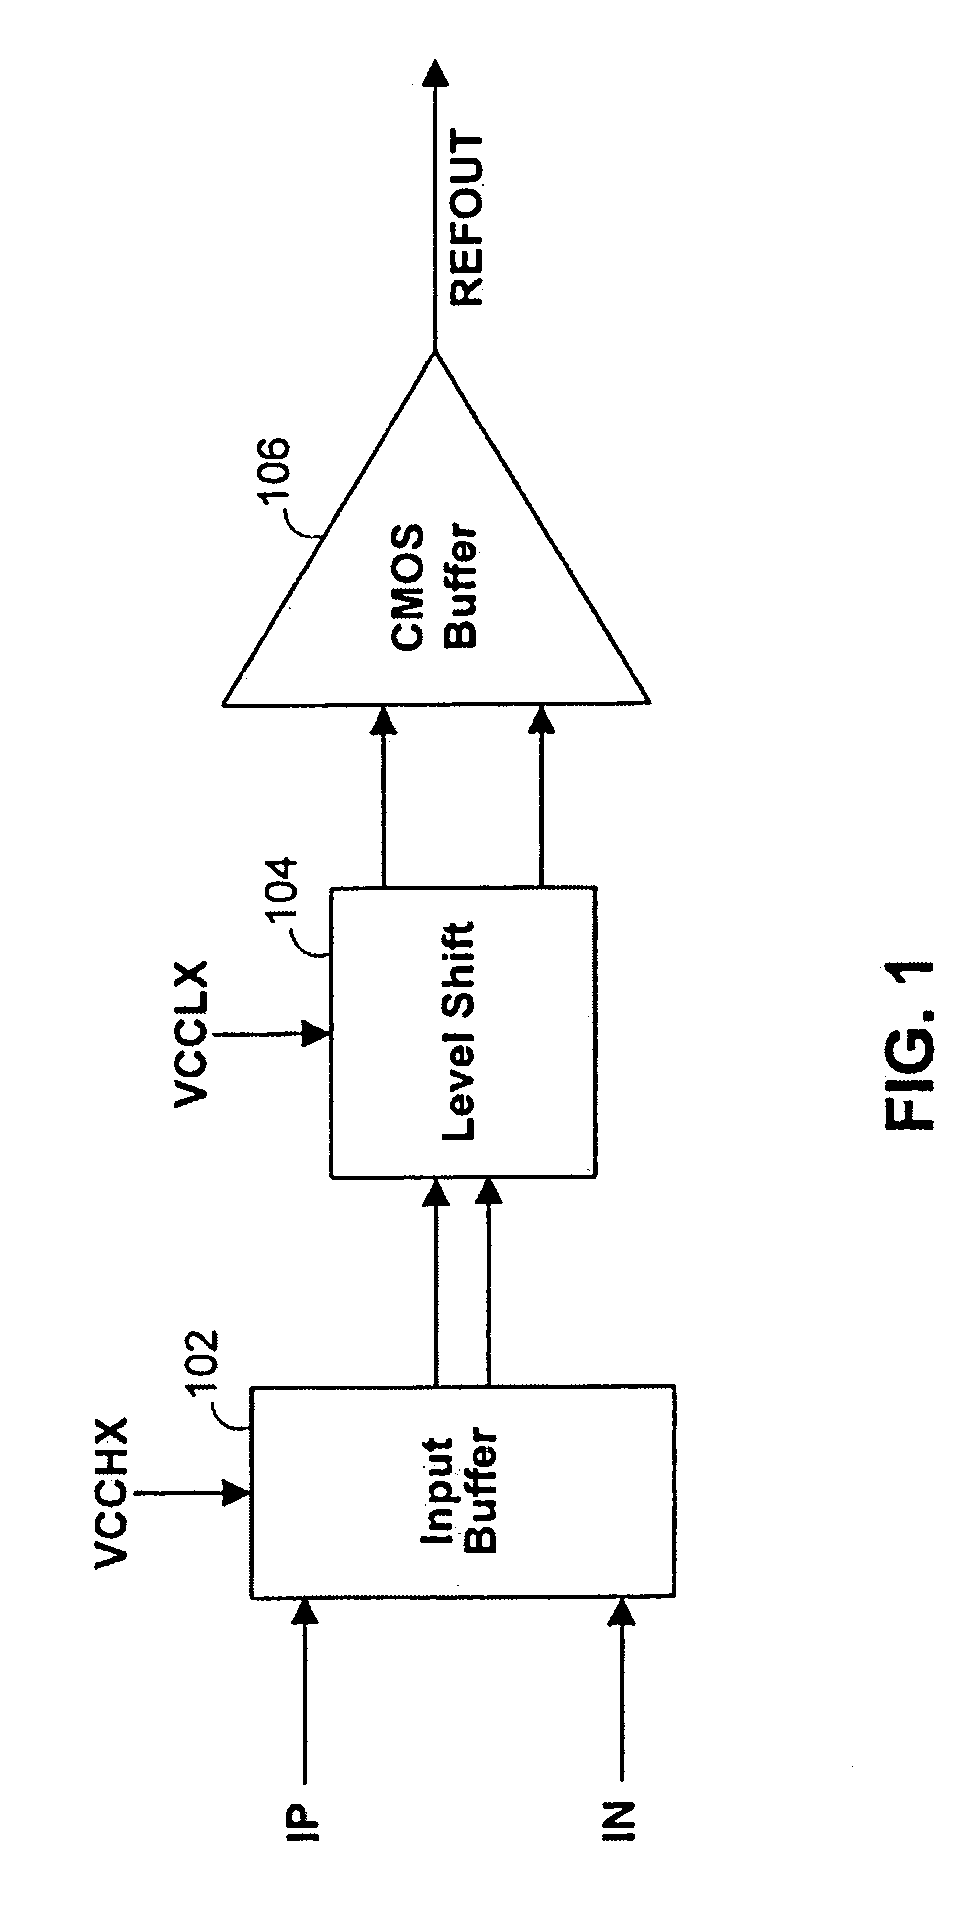 Reference clock receiver compliant with LVPECL, LVDS and PCI-Express supporting both AC coupling and DC coupling